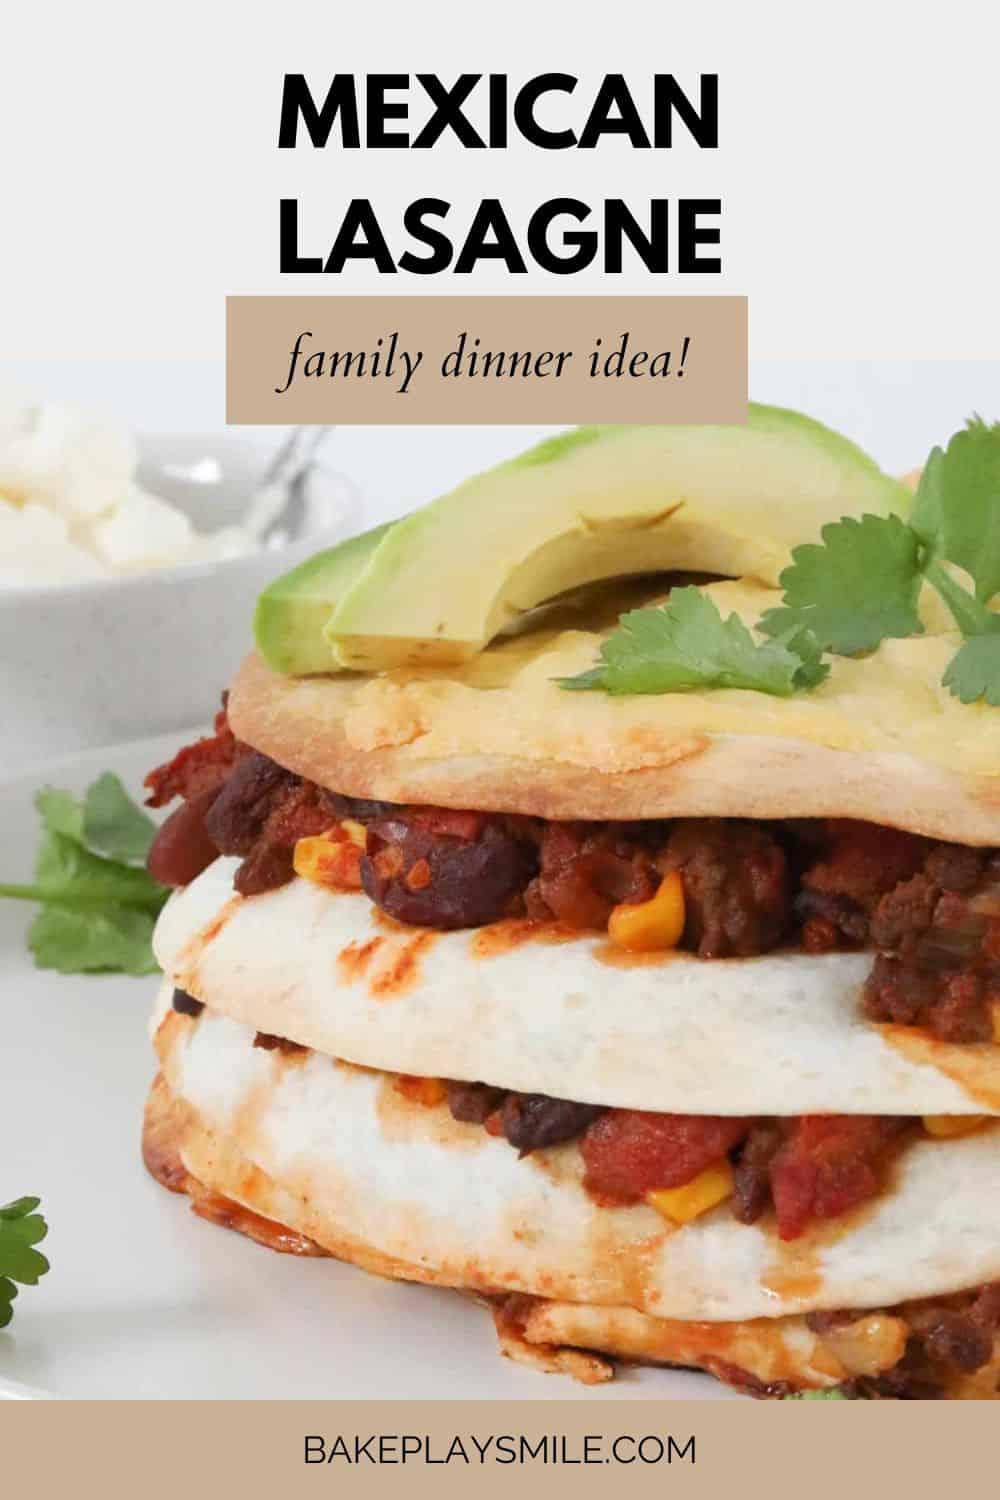 Mexican Lasagne with Tortillas - Bake Play Smile